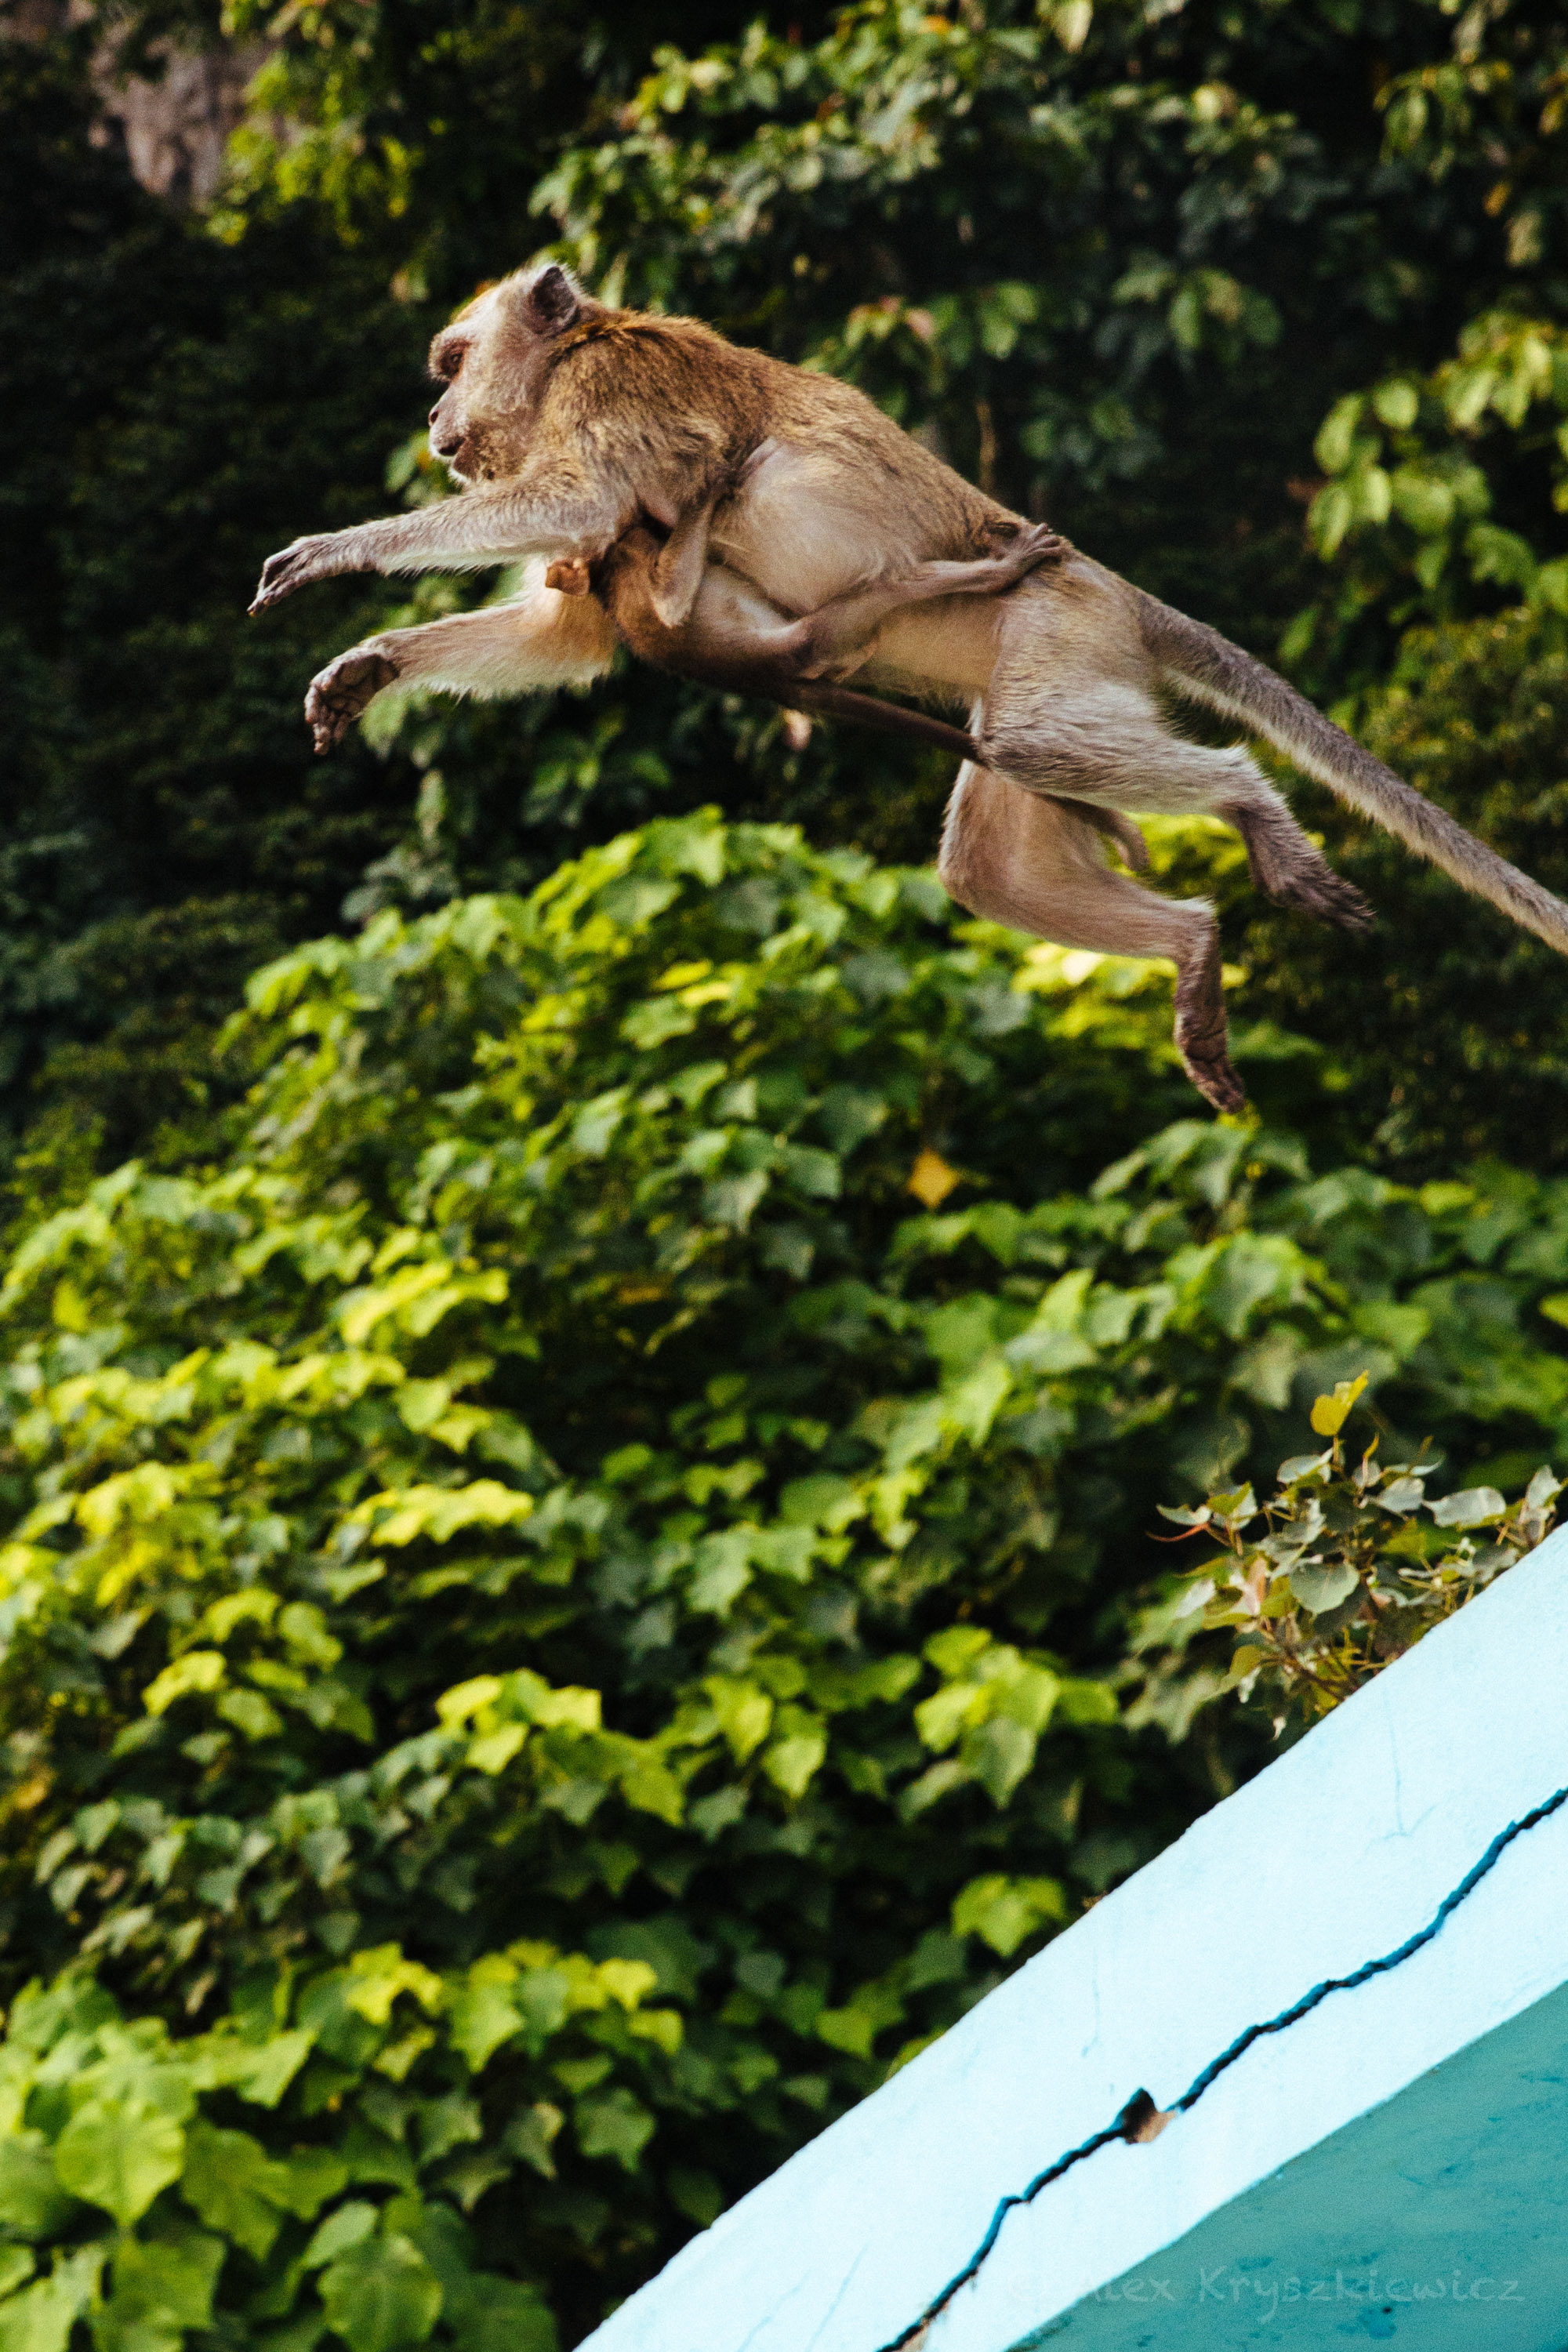 A mother macaque jumps from roof to roof while her baby hangs on for life. 